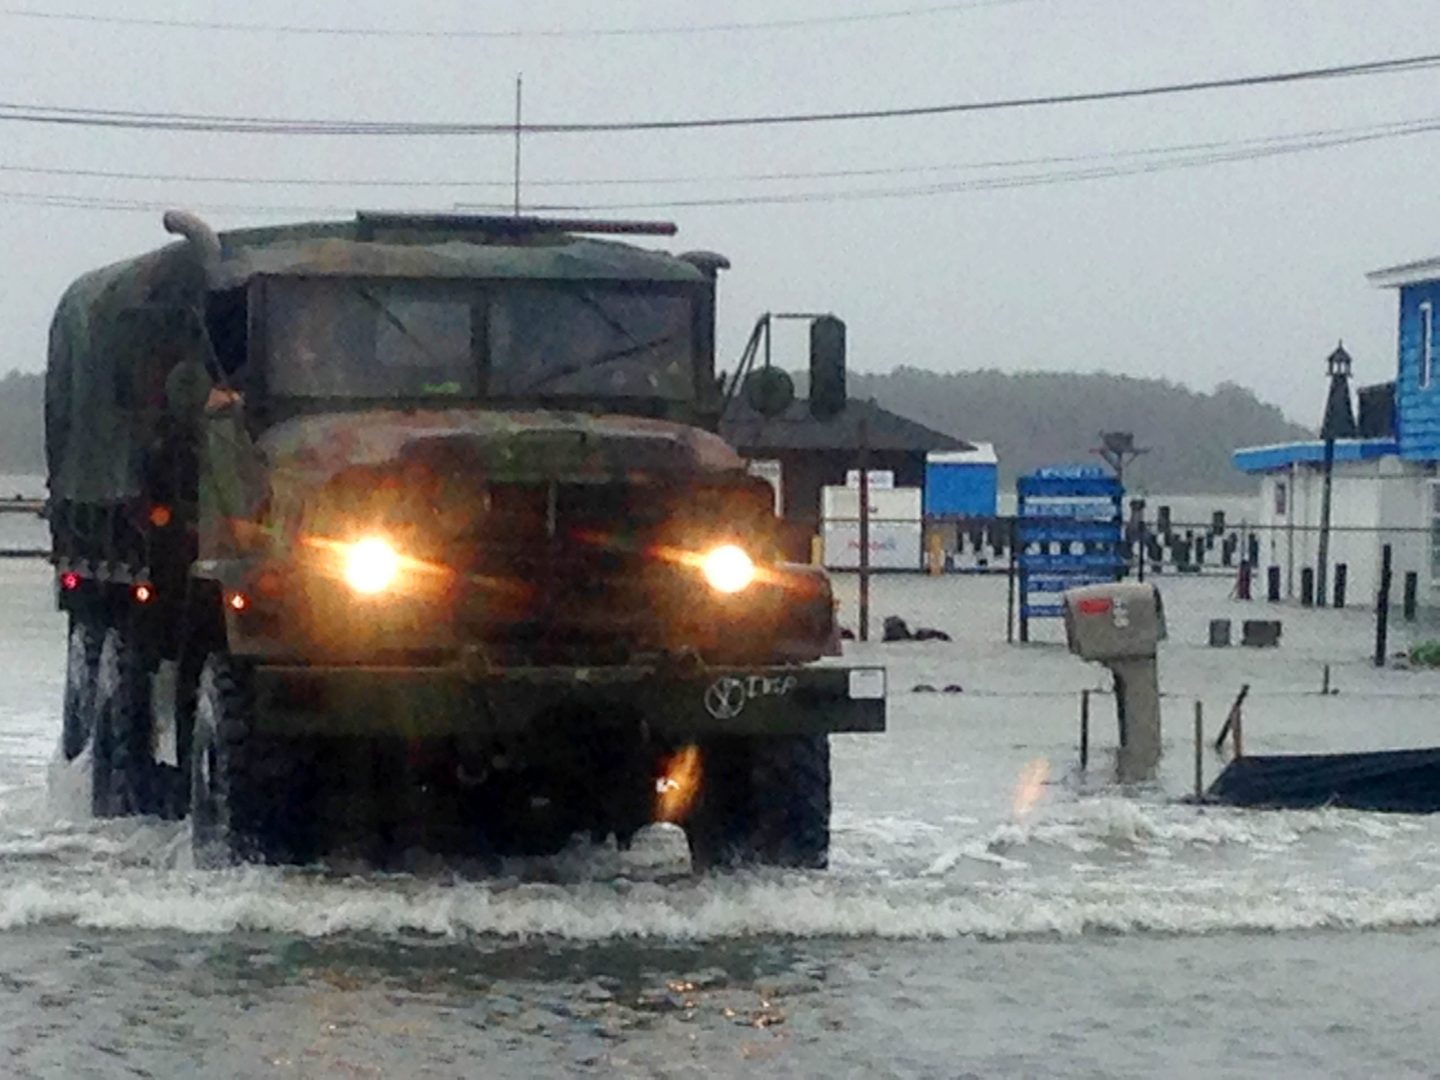 Tidal flooding like this in Dewey Beach, Del. will become more common with sea-level rise, scientists warn.